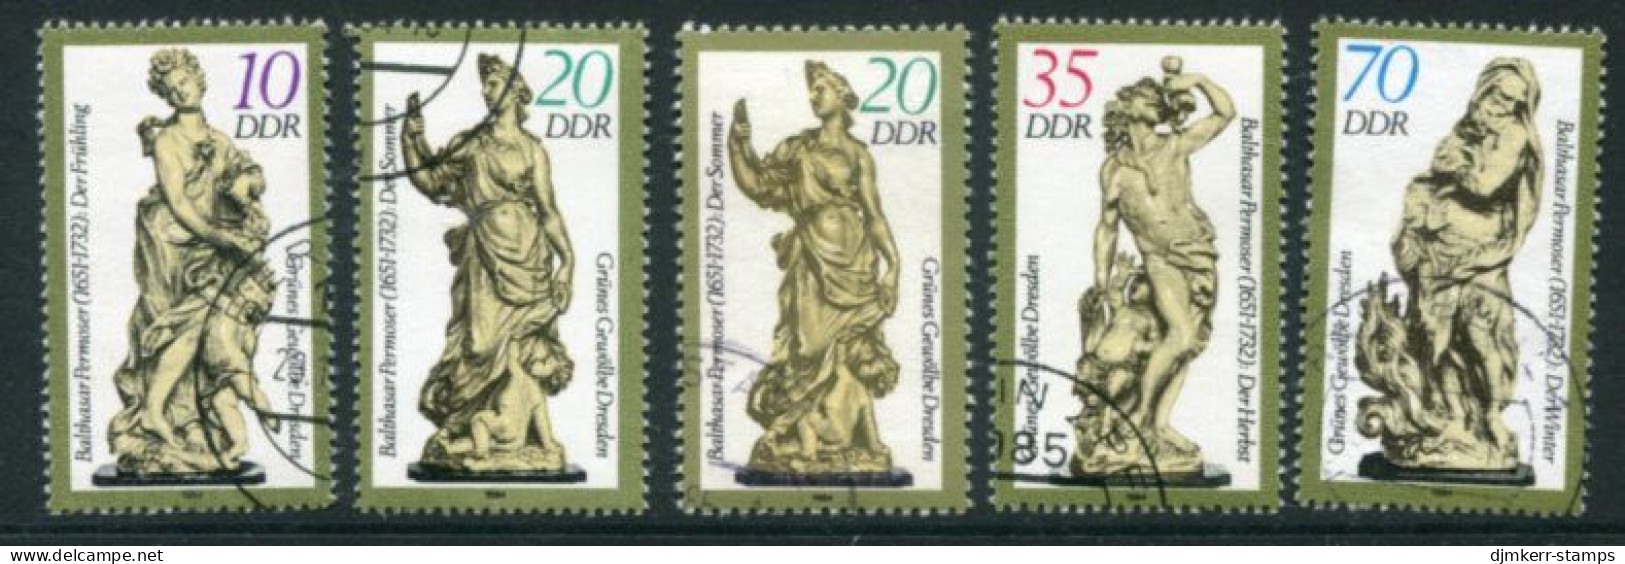 DDR 1984 Statues From The Green Vault With Both 20 Pf. Used.  Michel 2905-08 - Usados